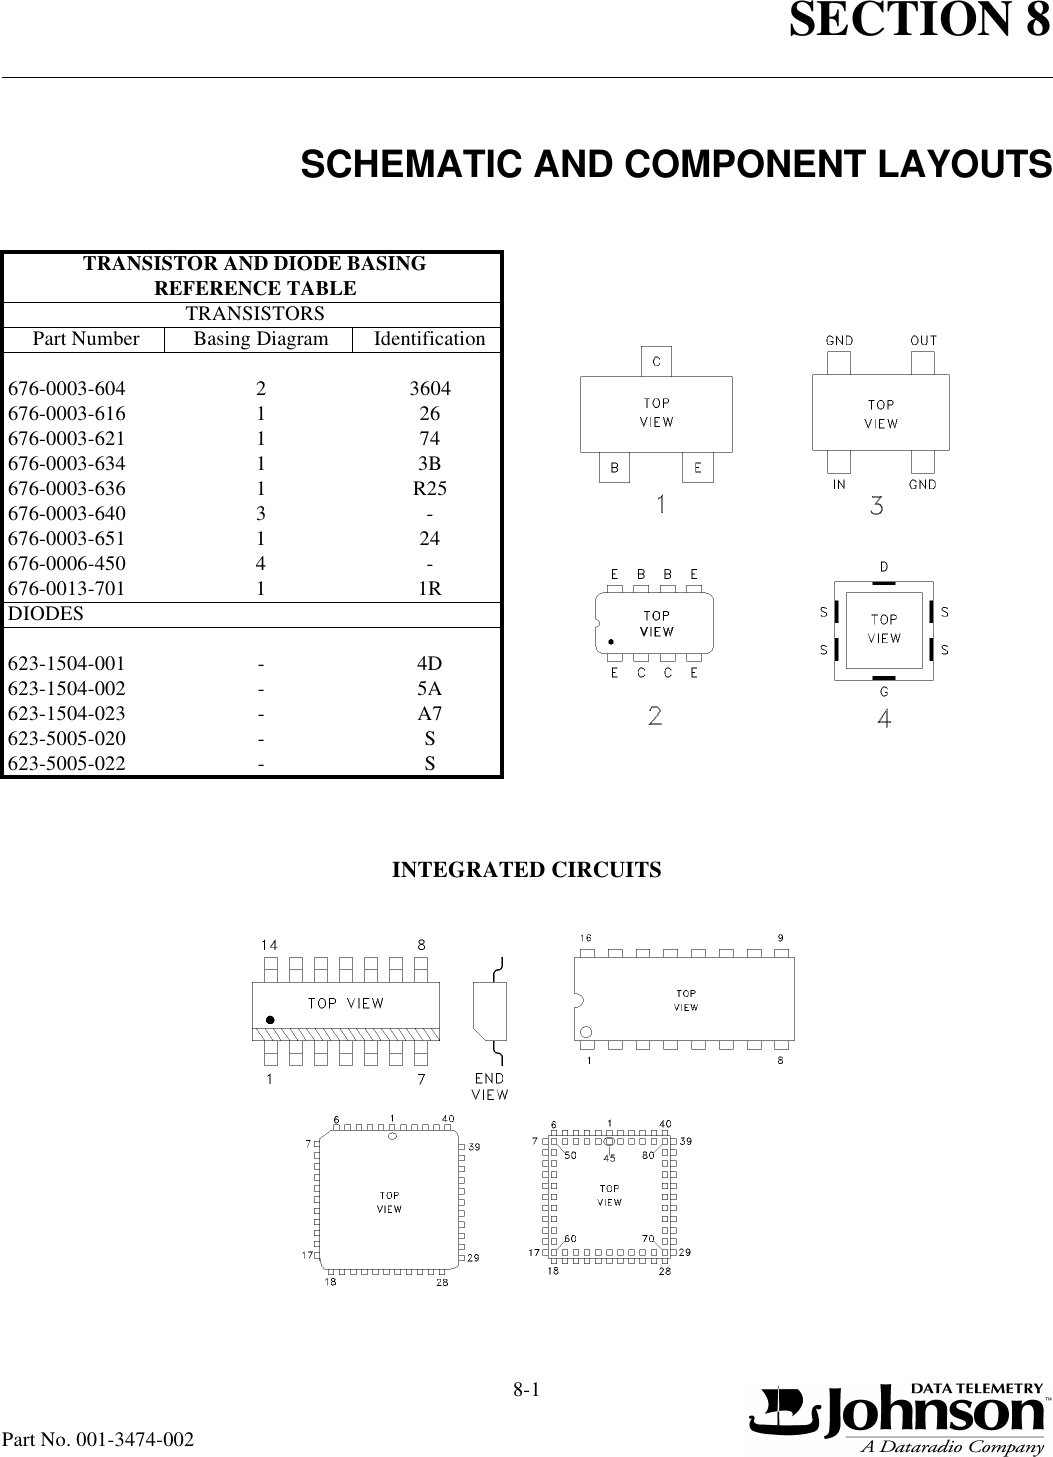 SECTION 88-1Part No. 001-3474-002SCHEMATIC AND COMPONENT LAYOUTSINTEGRATED CIRCUITSTRANSISTOR AND DIODE BASINGREFERENCE TABLETRANSISTORSPart Number Basing Diagram Identification676-0003-604 2 3604676-0003-616 1 26676-0003-621 1 74676-0003-634 13B676-0003-636 1R25676-0003-640 3-676-0003-651 1 24676-0006-450 4-676-0013-701 11RDIODES623-1504-001 -4D623-1504-002 -5A623-1504-023 -A7623-5005-020 -S623-5005-022 -S